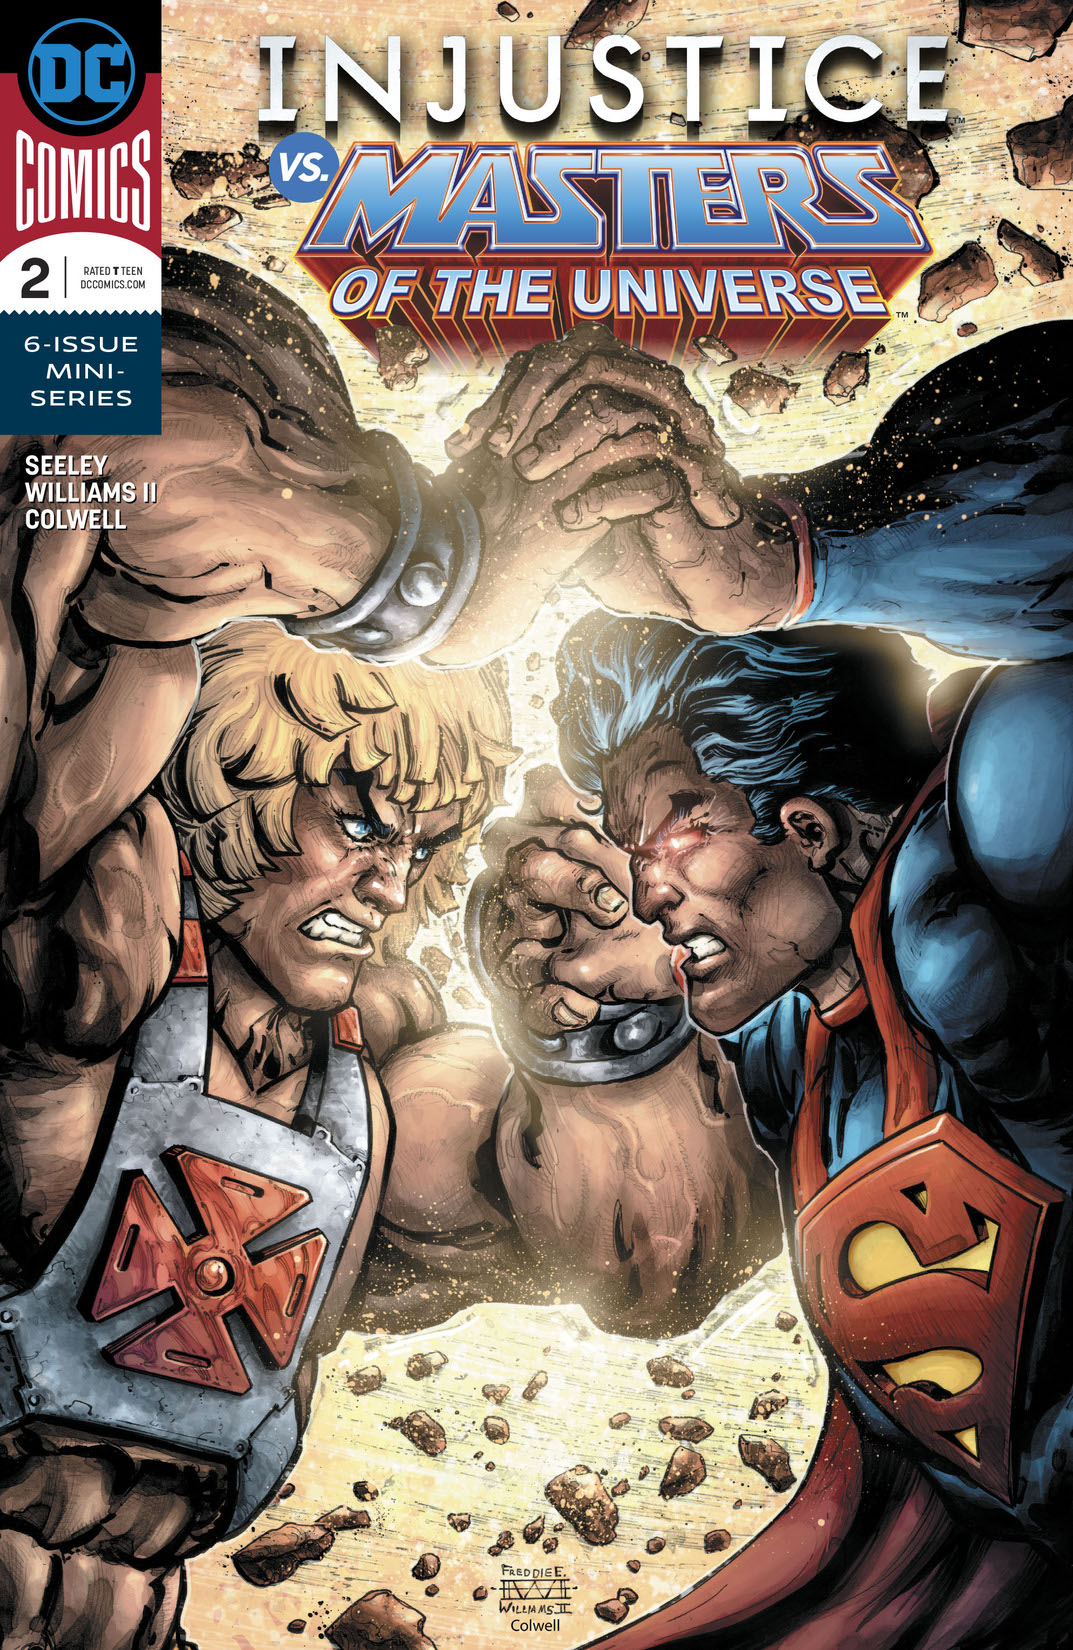 Injustice Vs. Masters of the Universe #2 preview images